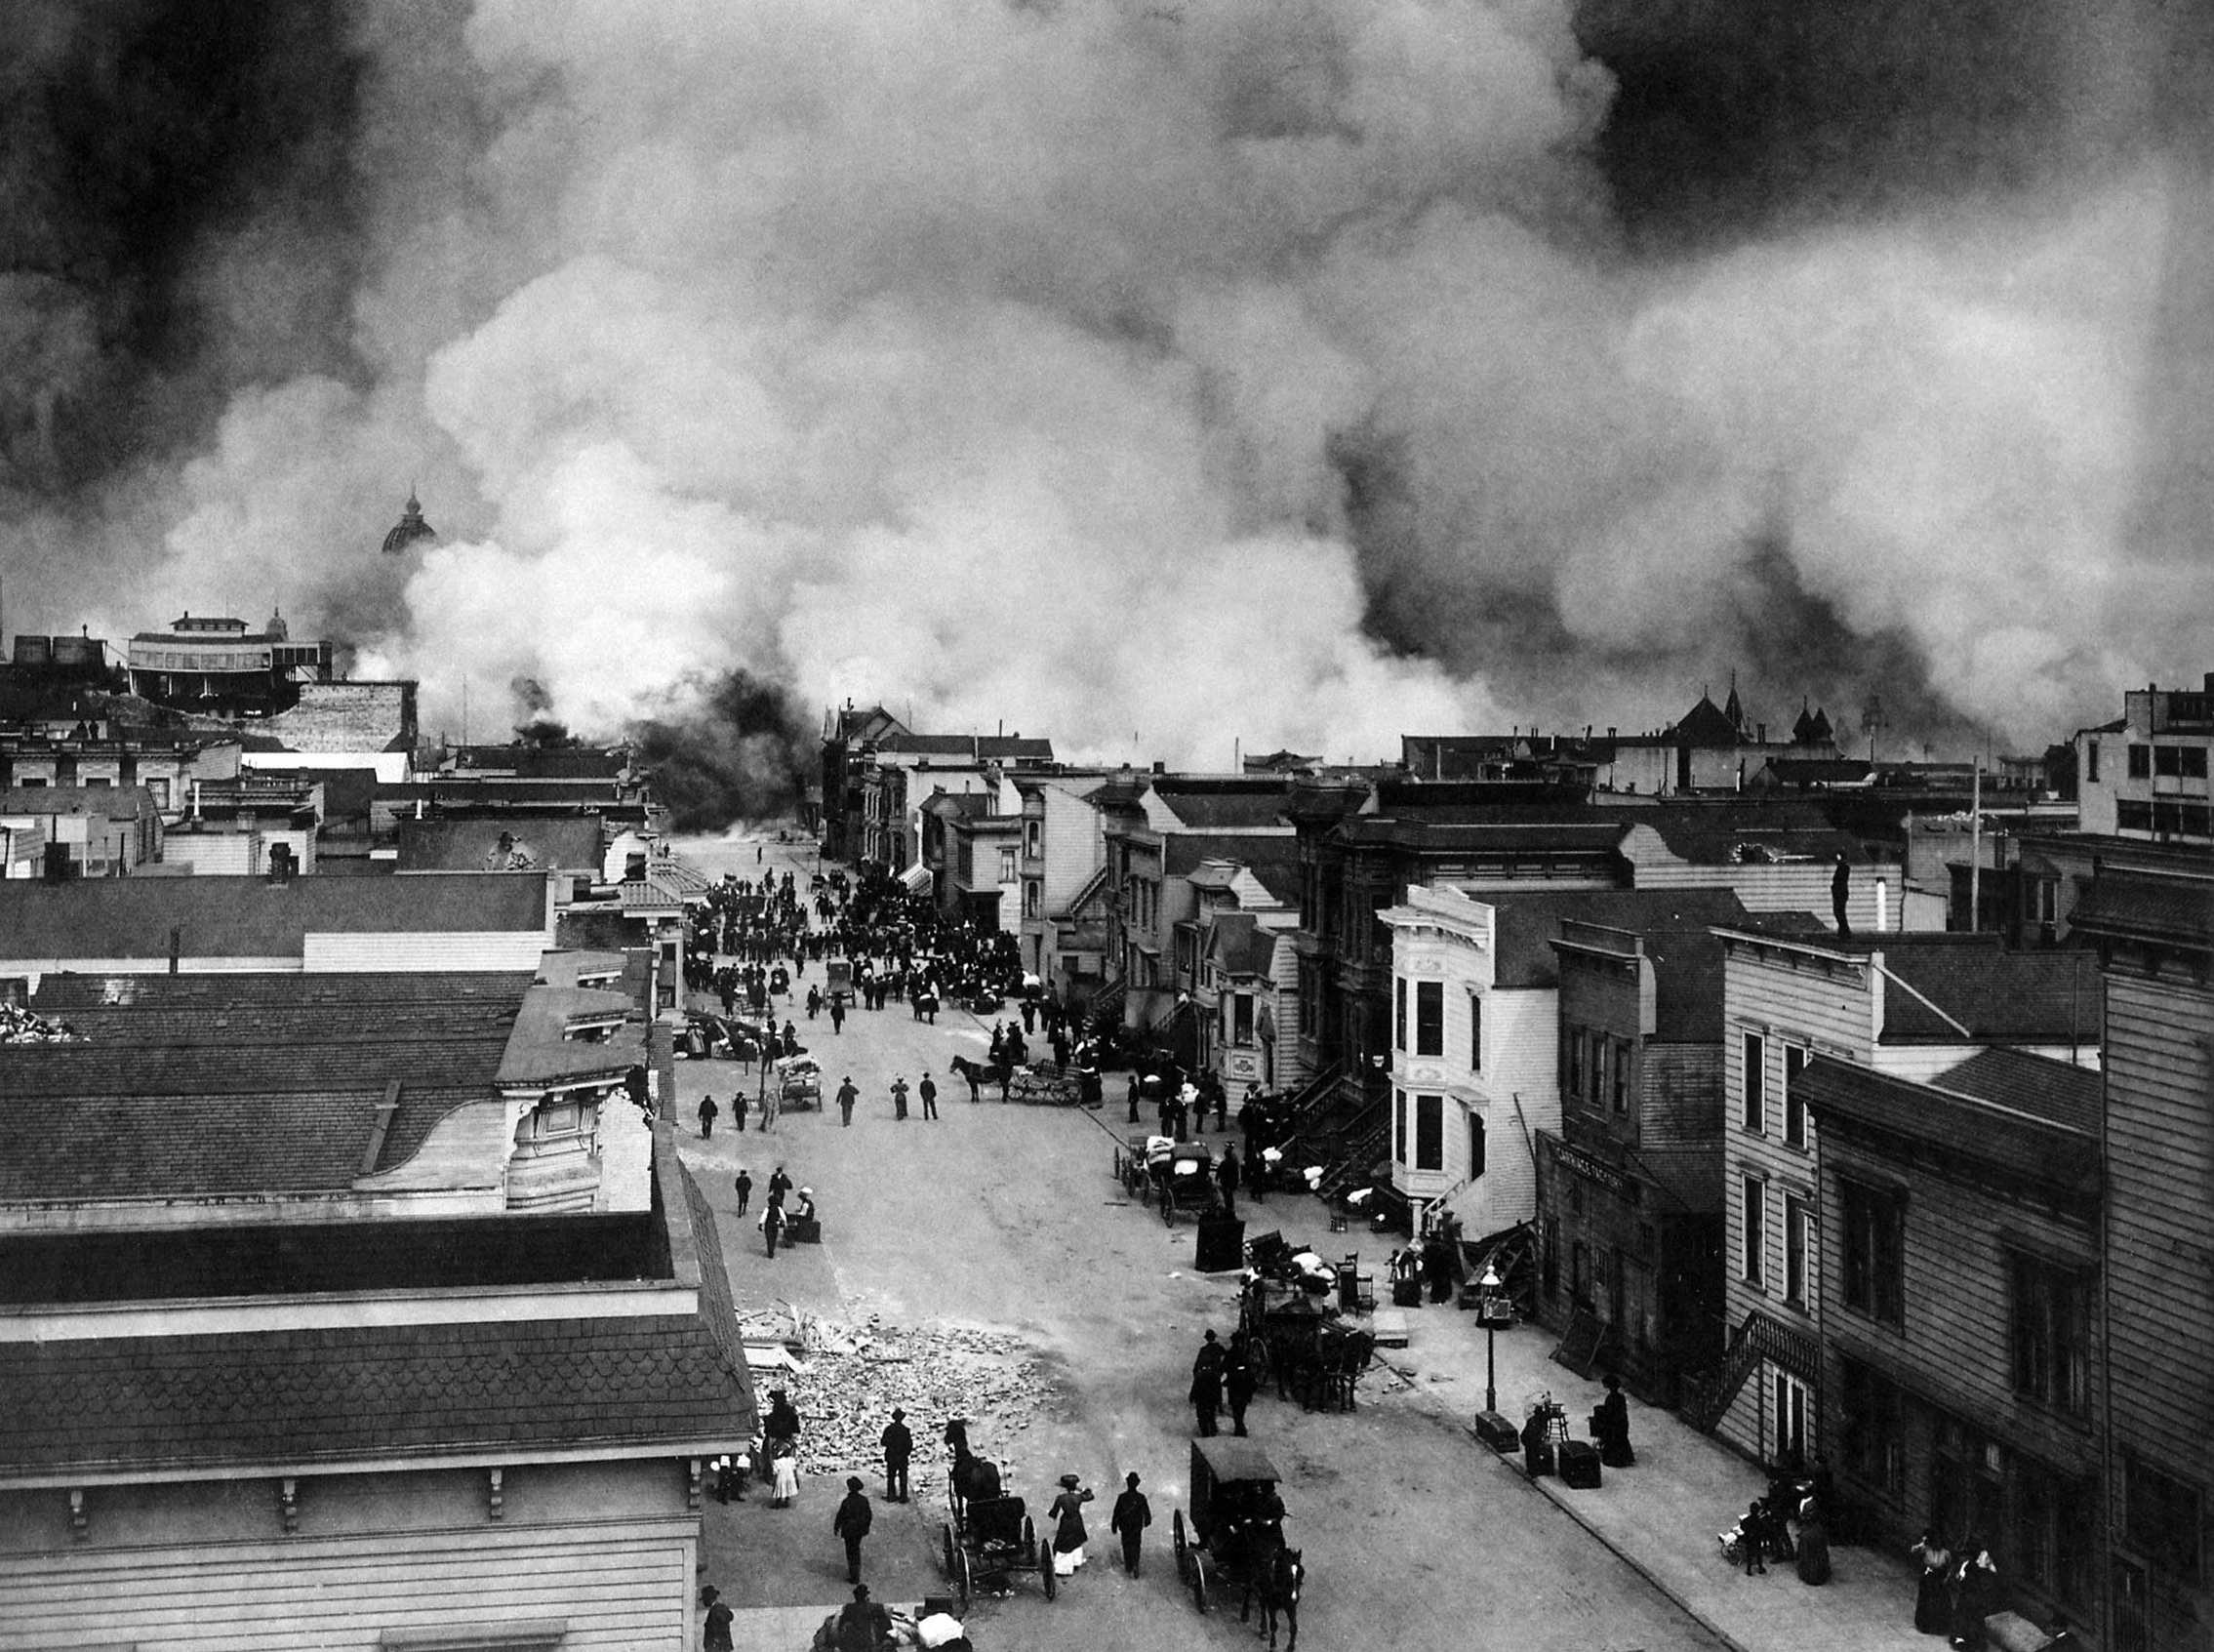 Aftermath of the San Francisco earthquake 1906